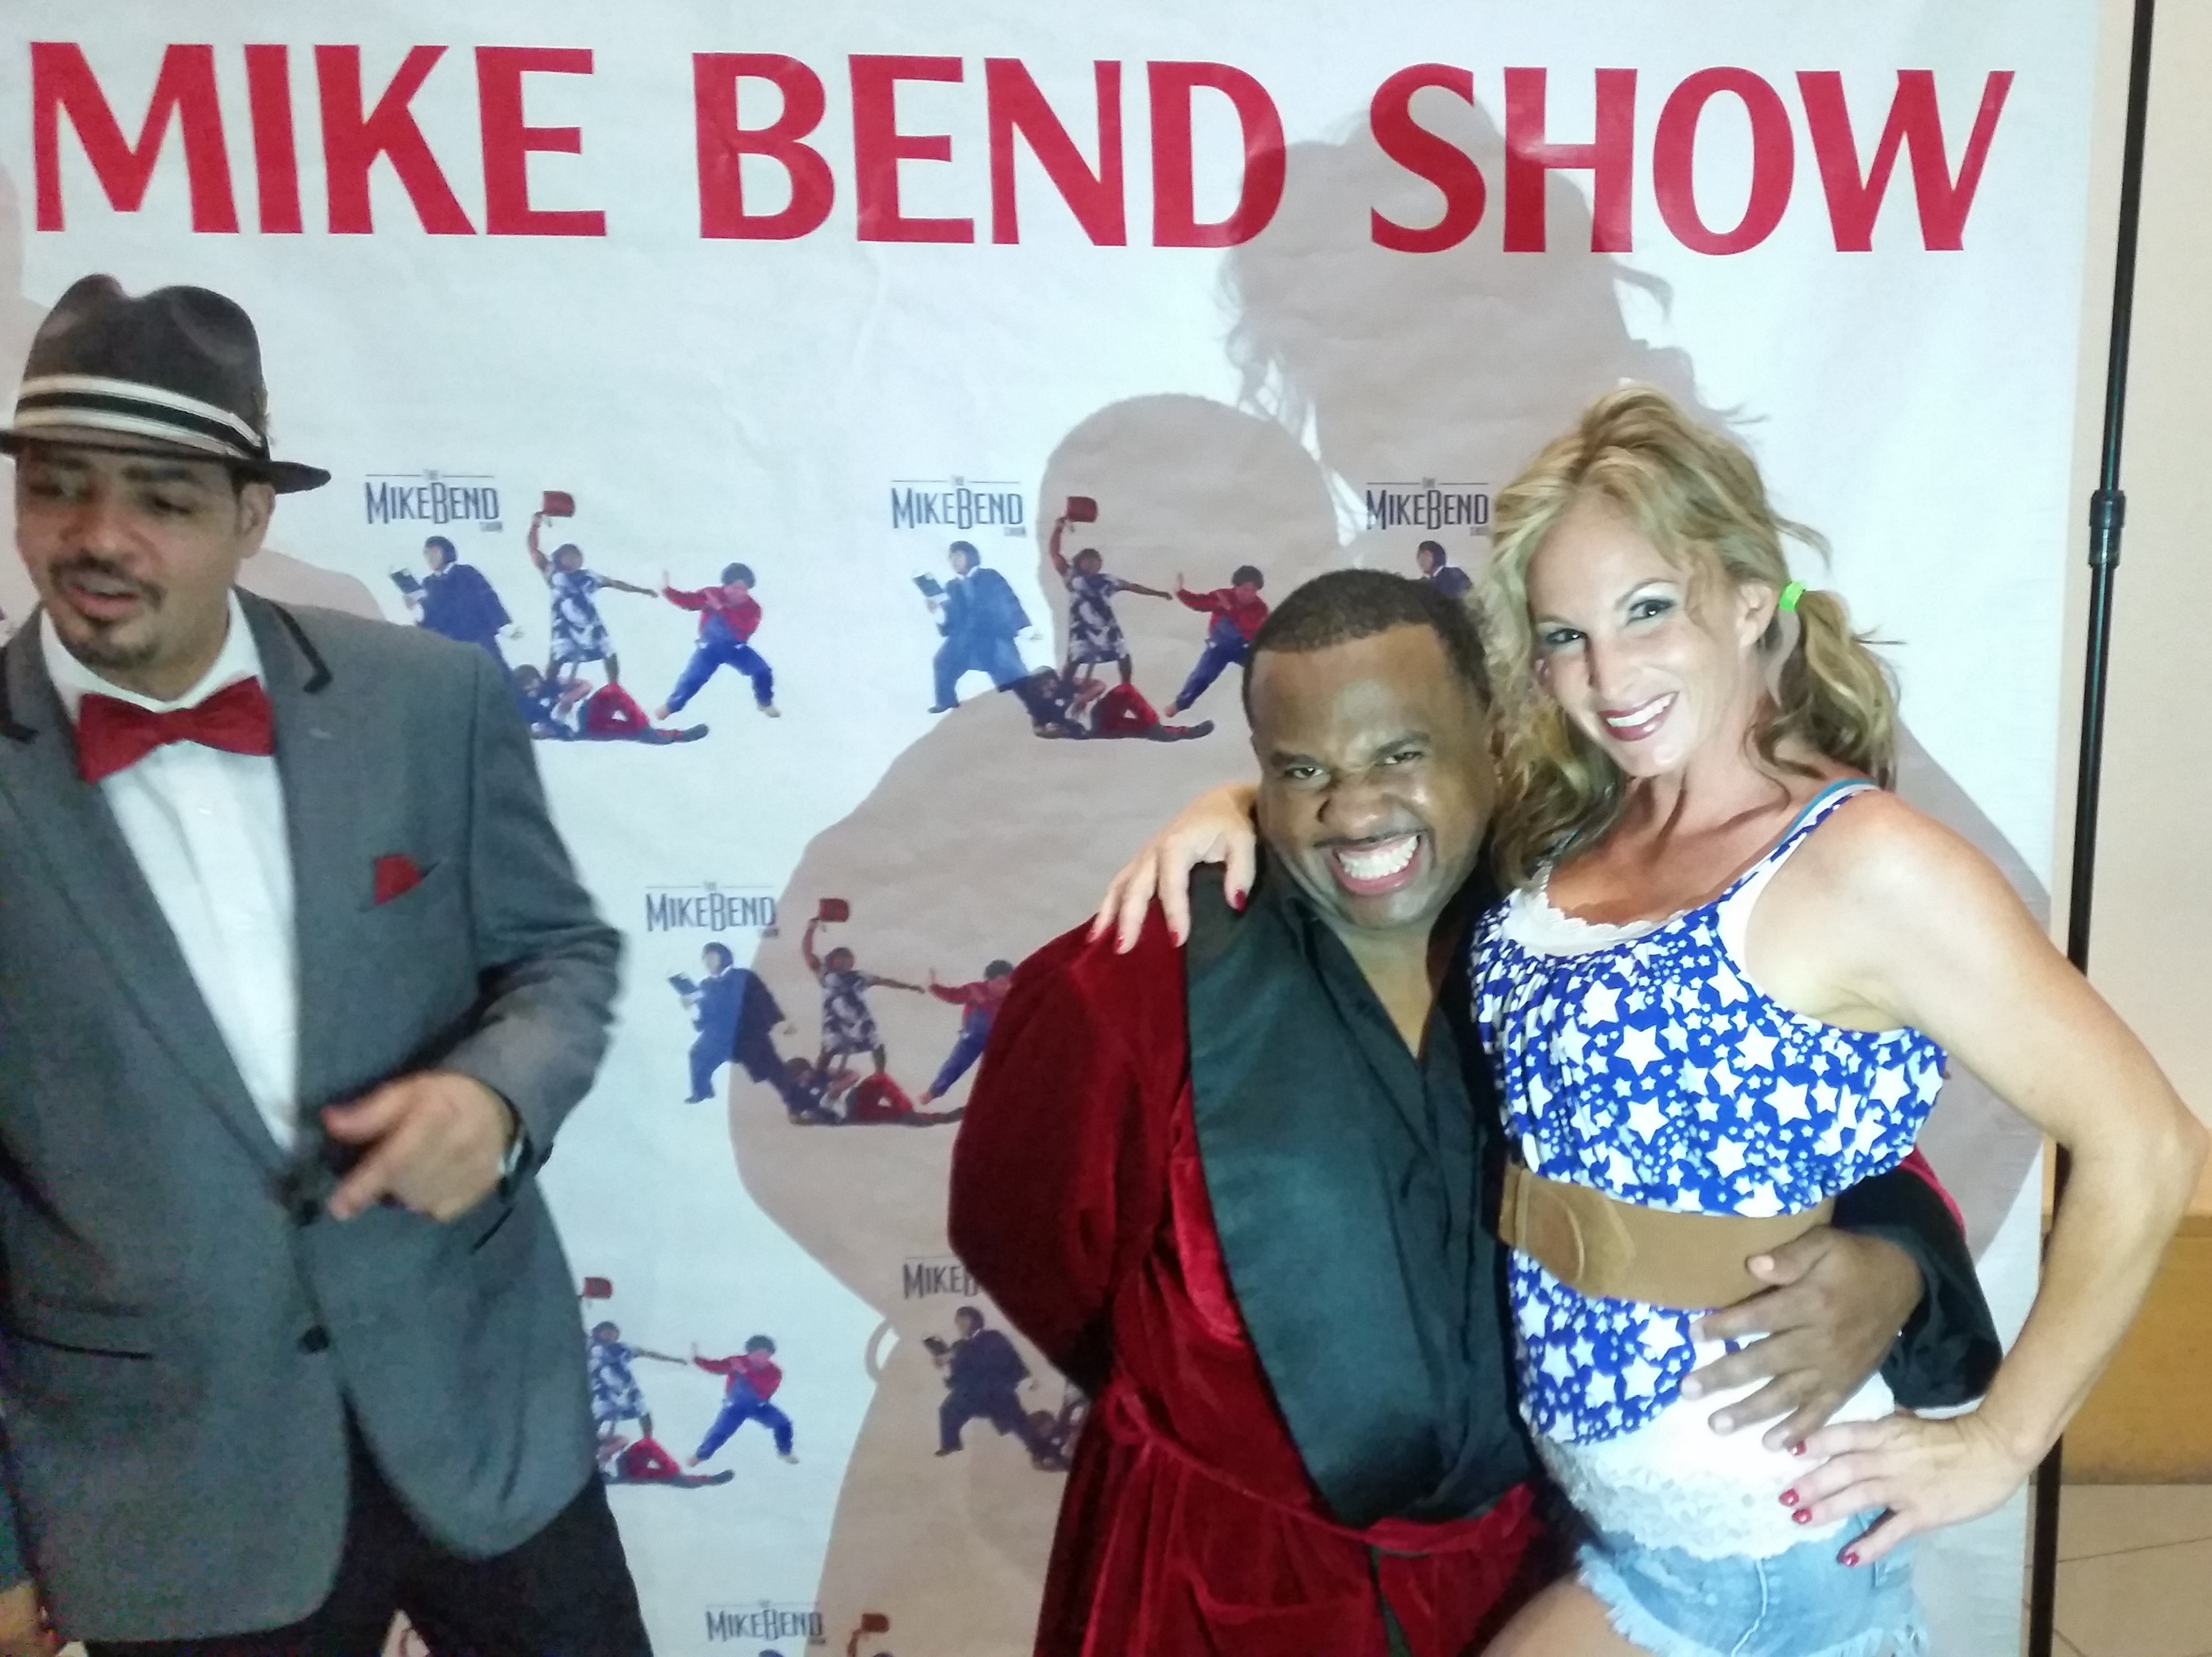 Mike Bend Show, after show pictures. June 2015